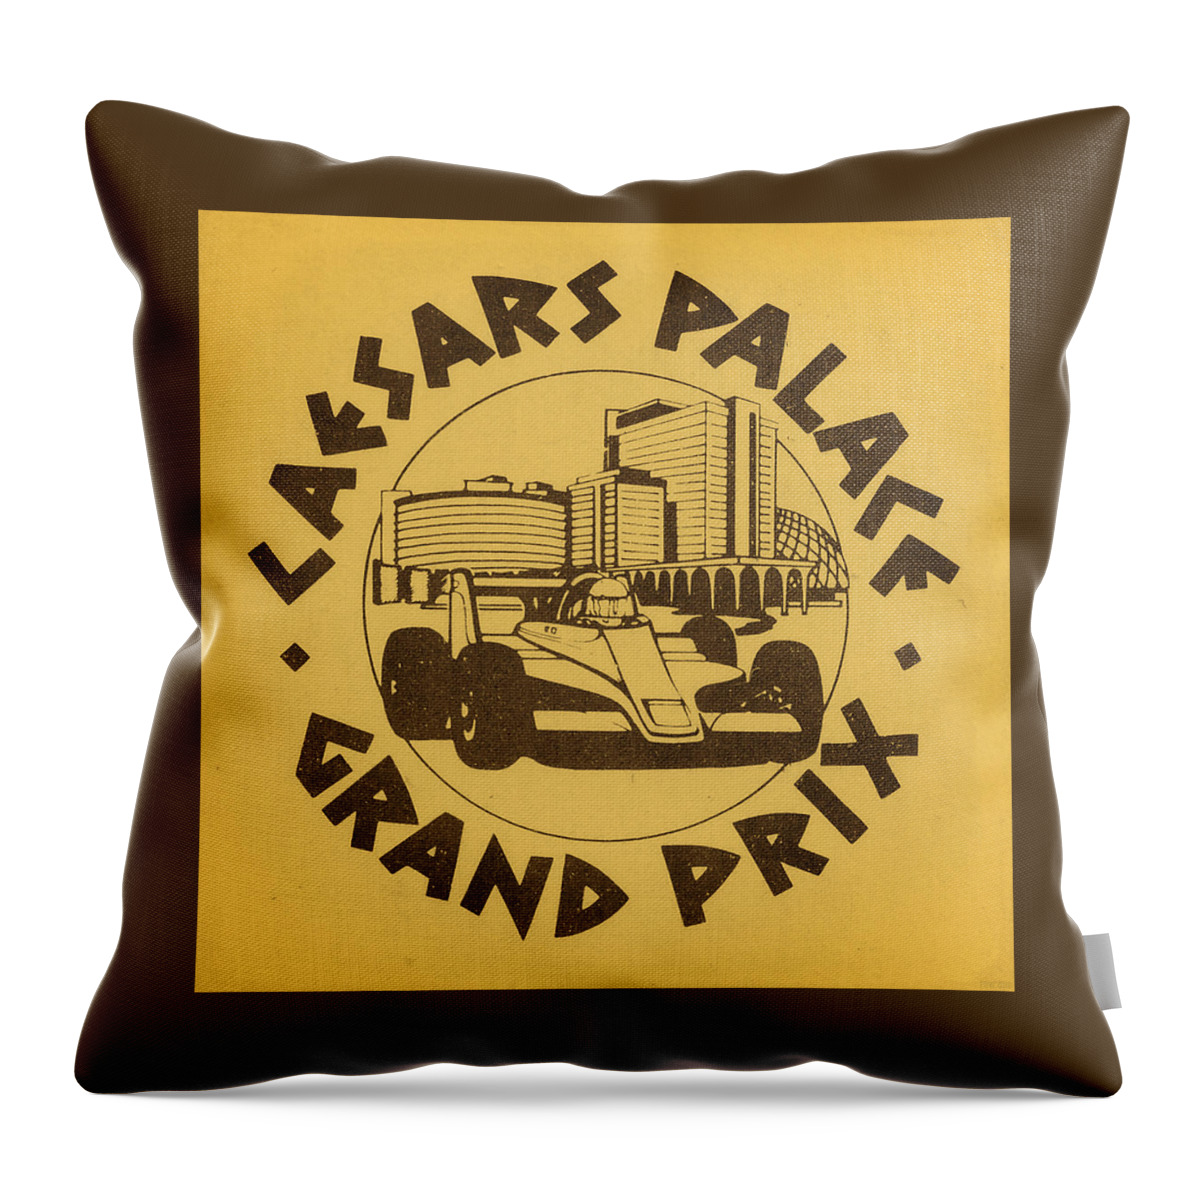 1981 Throw Pillow featuring the mixed media 1981 Caesar's Palace Grand Prix by Row One Brand